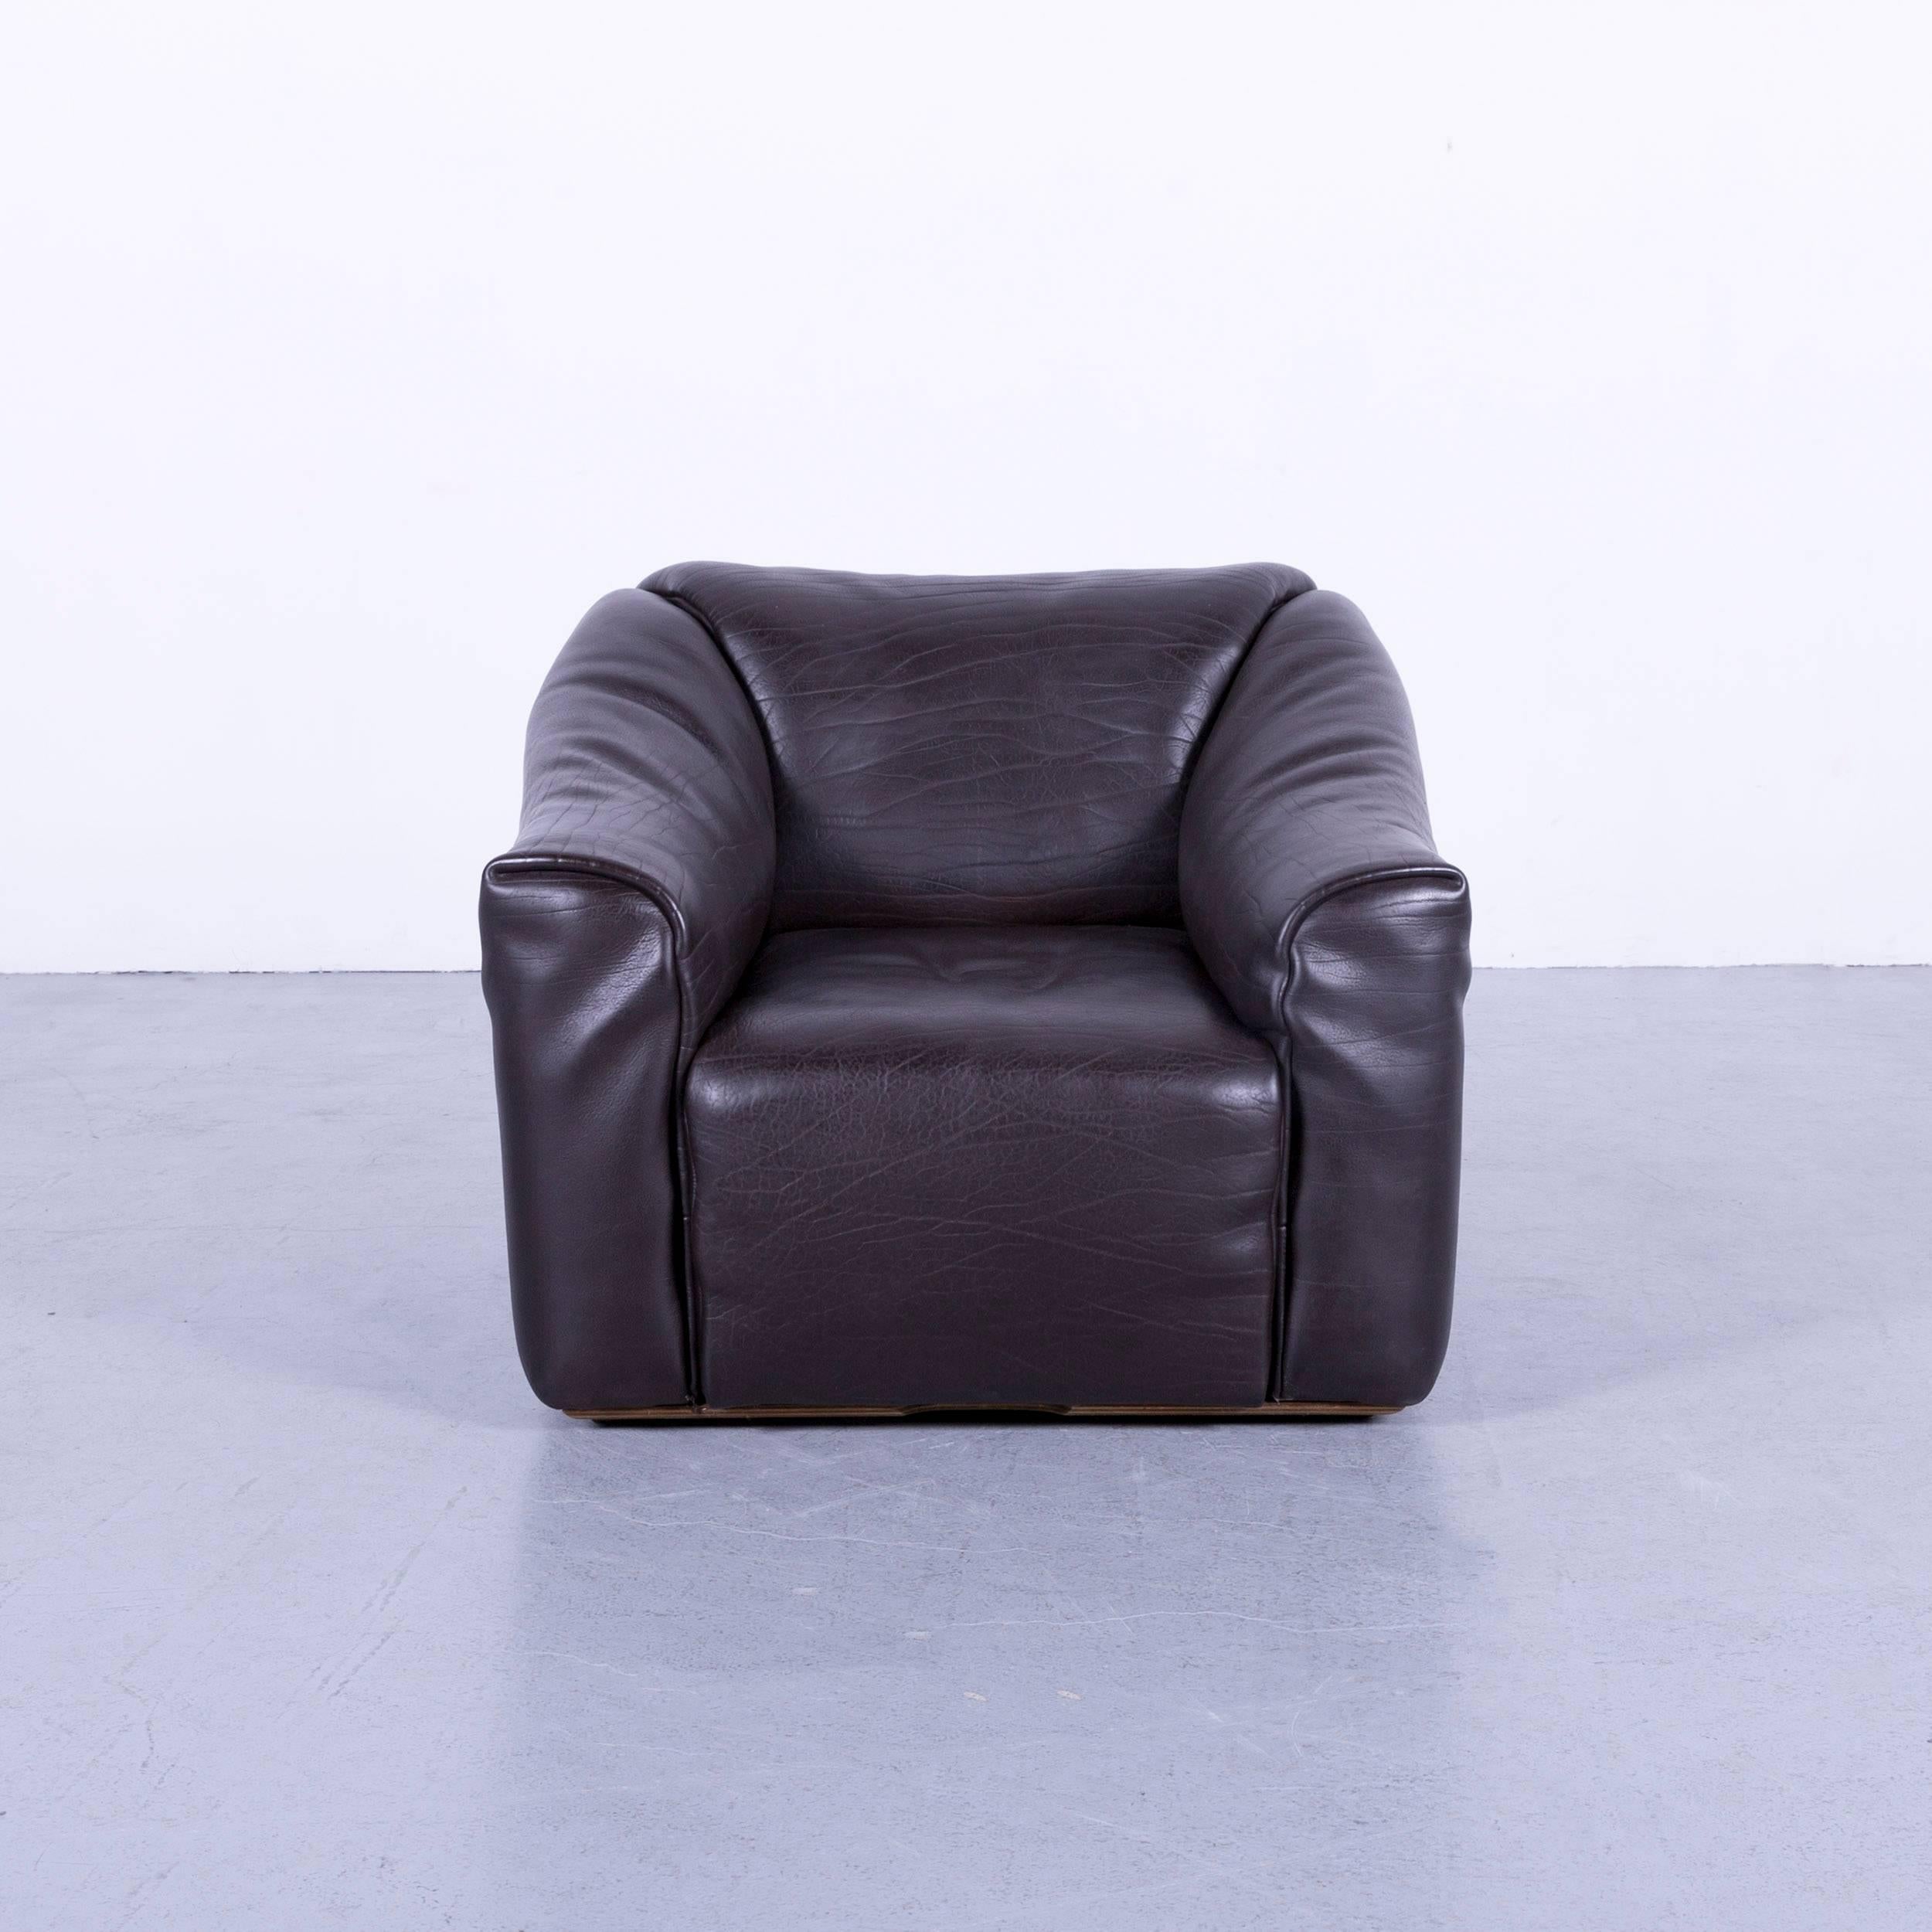 Swiss De Sede DS 47 Leather Armchair Brown One-Seat Function